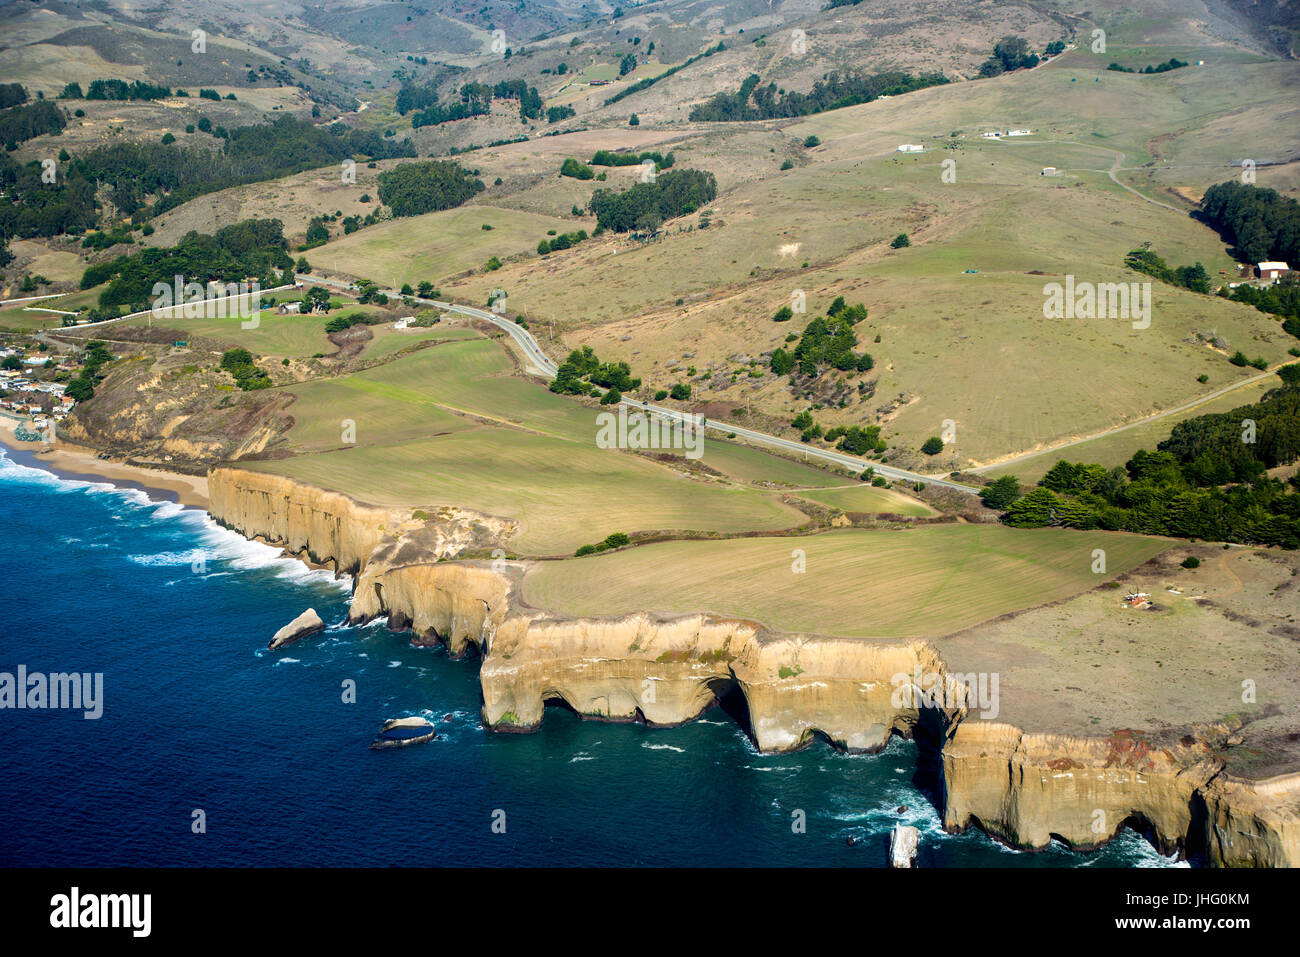 Flying from Palo Alto to Half Moon Bay, California in a small private airplane. Stock Photo